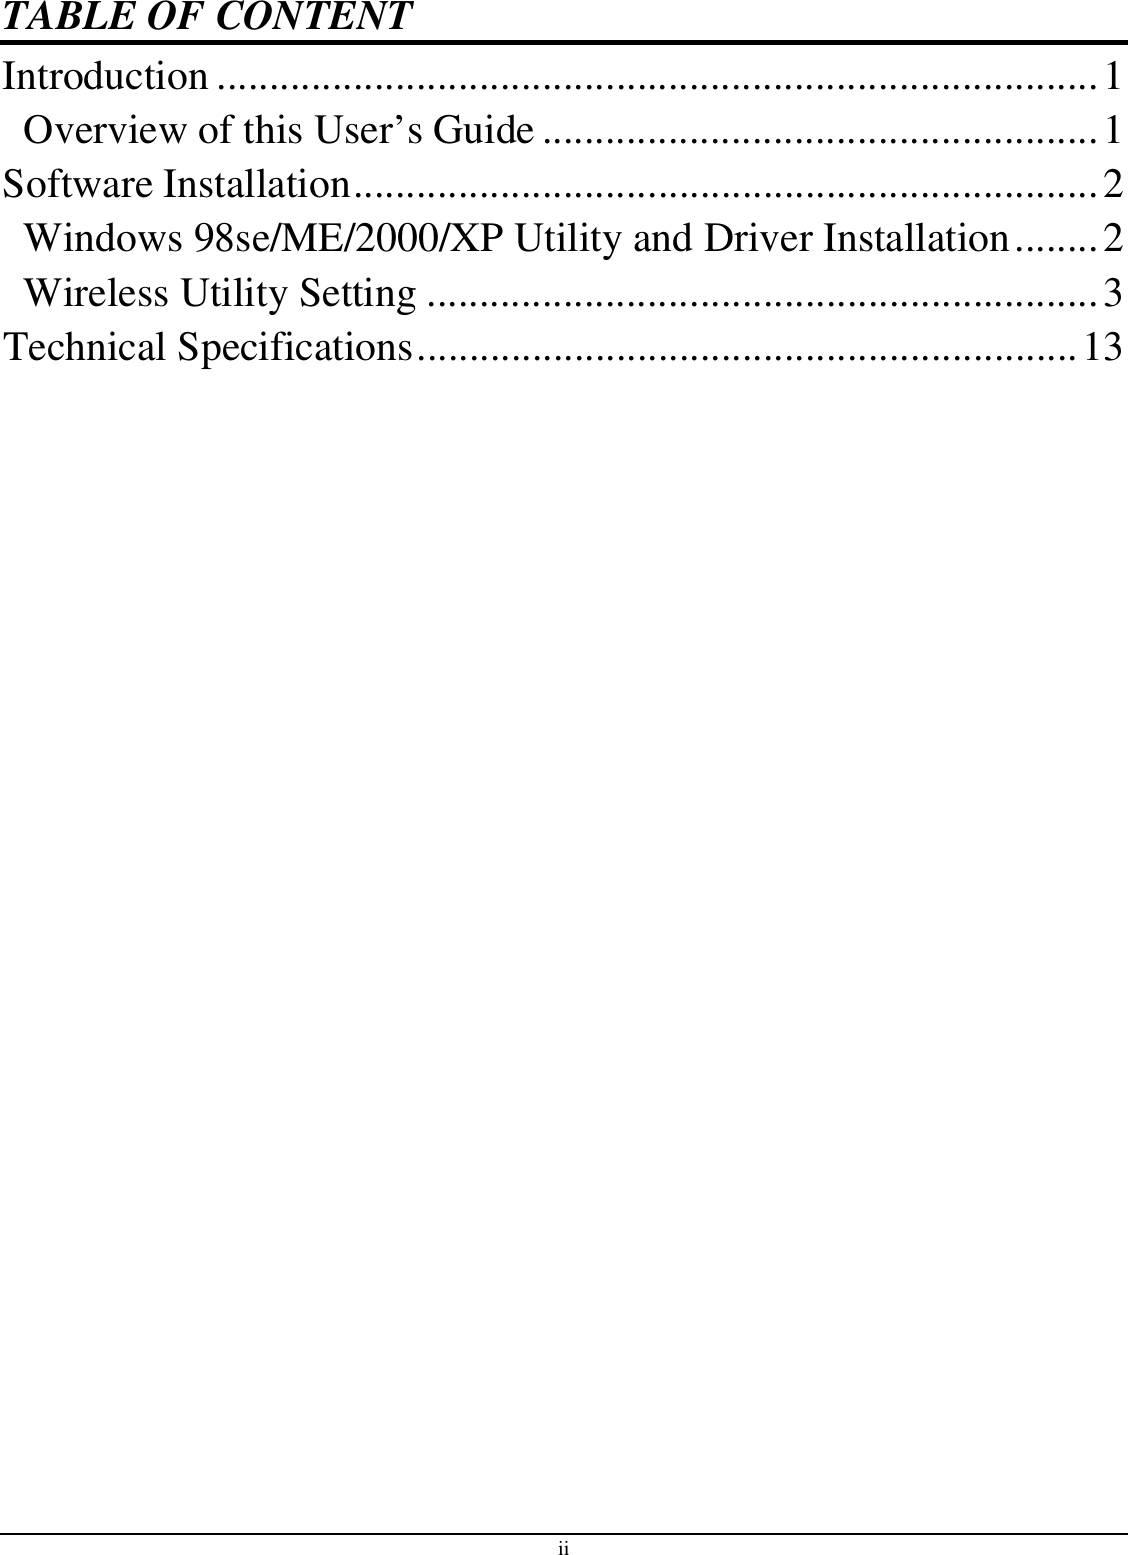 ii TABLE OF CONTENT Introduction .................................................................................... 1 Overview of this User’s Guide ..................................................... 1 Software Installation ....................................................................... 2 Windows 98se/ME/2000/XP Utility and Driver Installation ........ 2 Wireless Utility Setting ................................................................ 3 Technical Specifications ............................................................... 13  